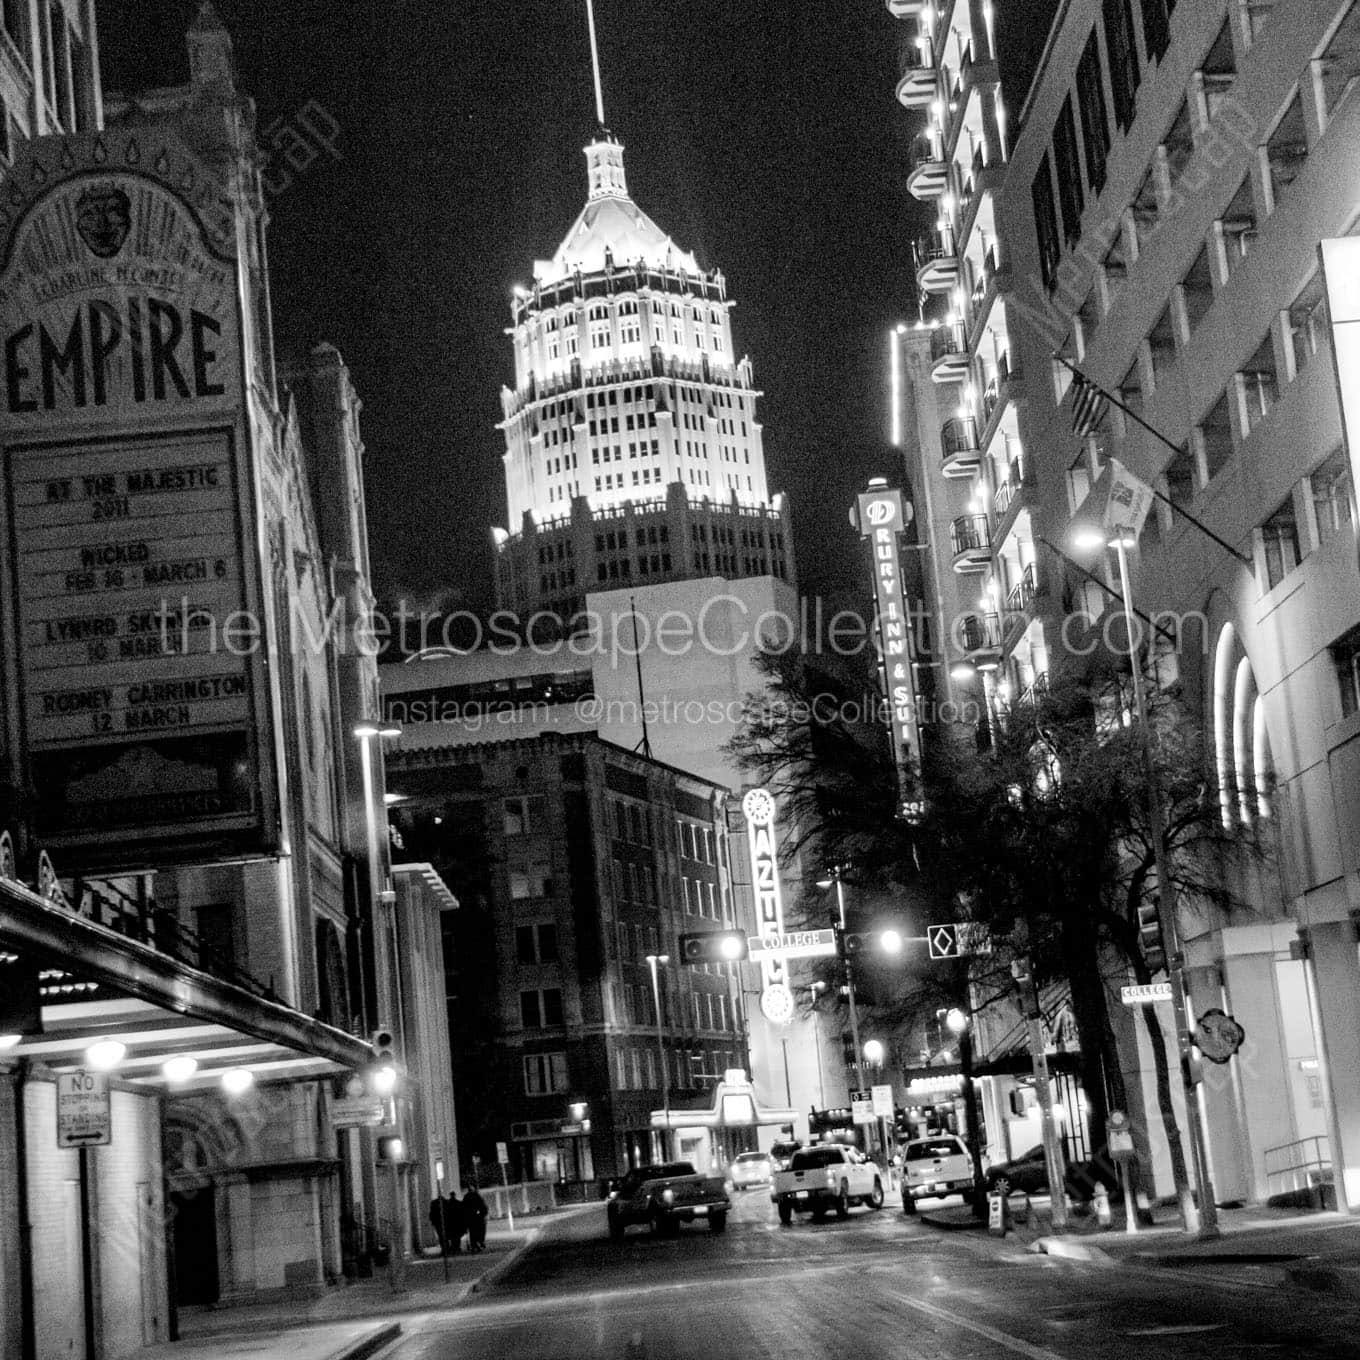 tower life building aztec theater at night Black & White Office Art